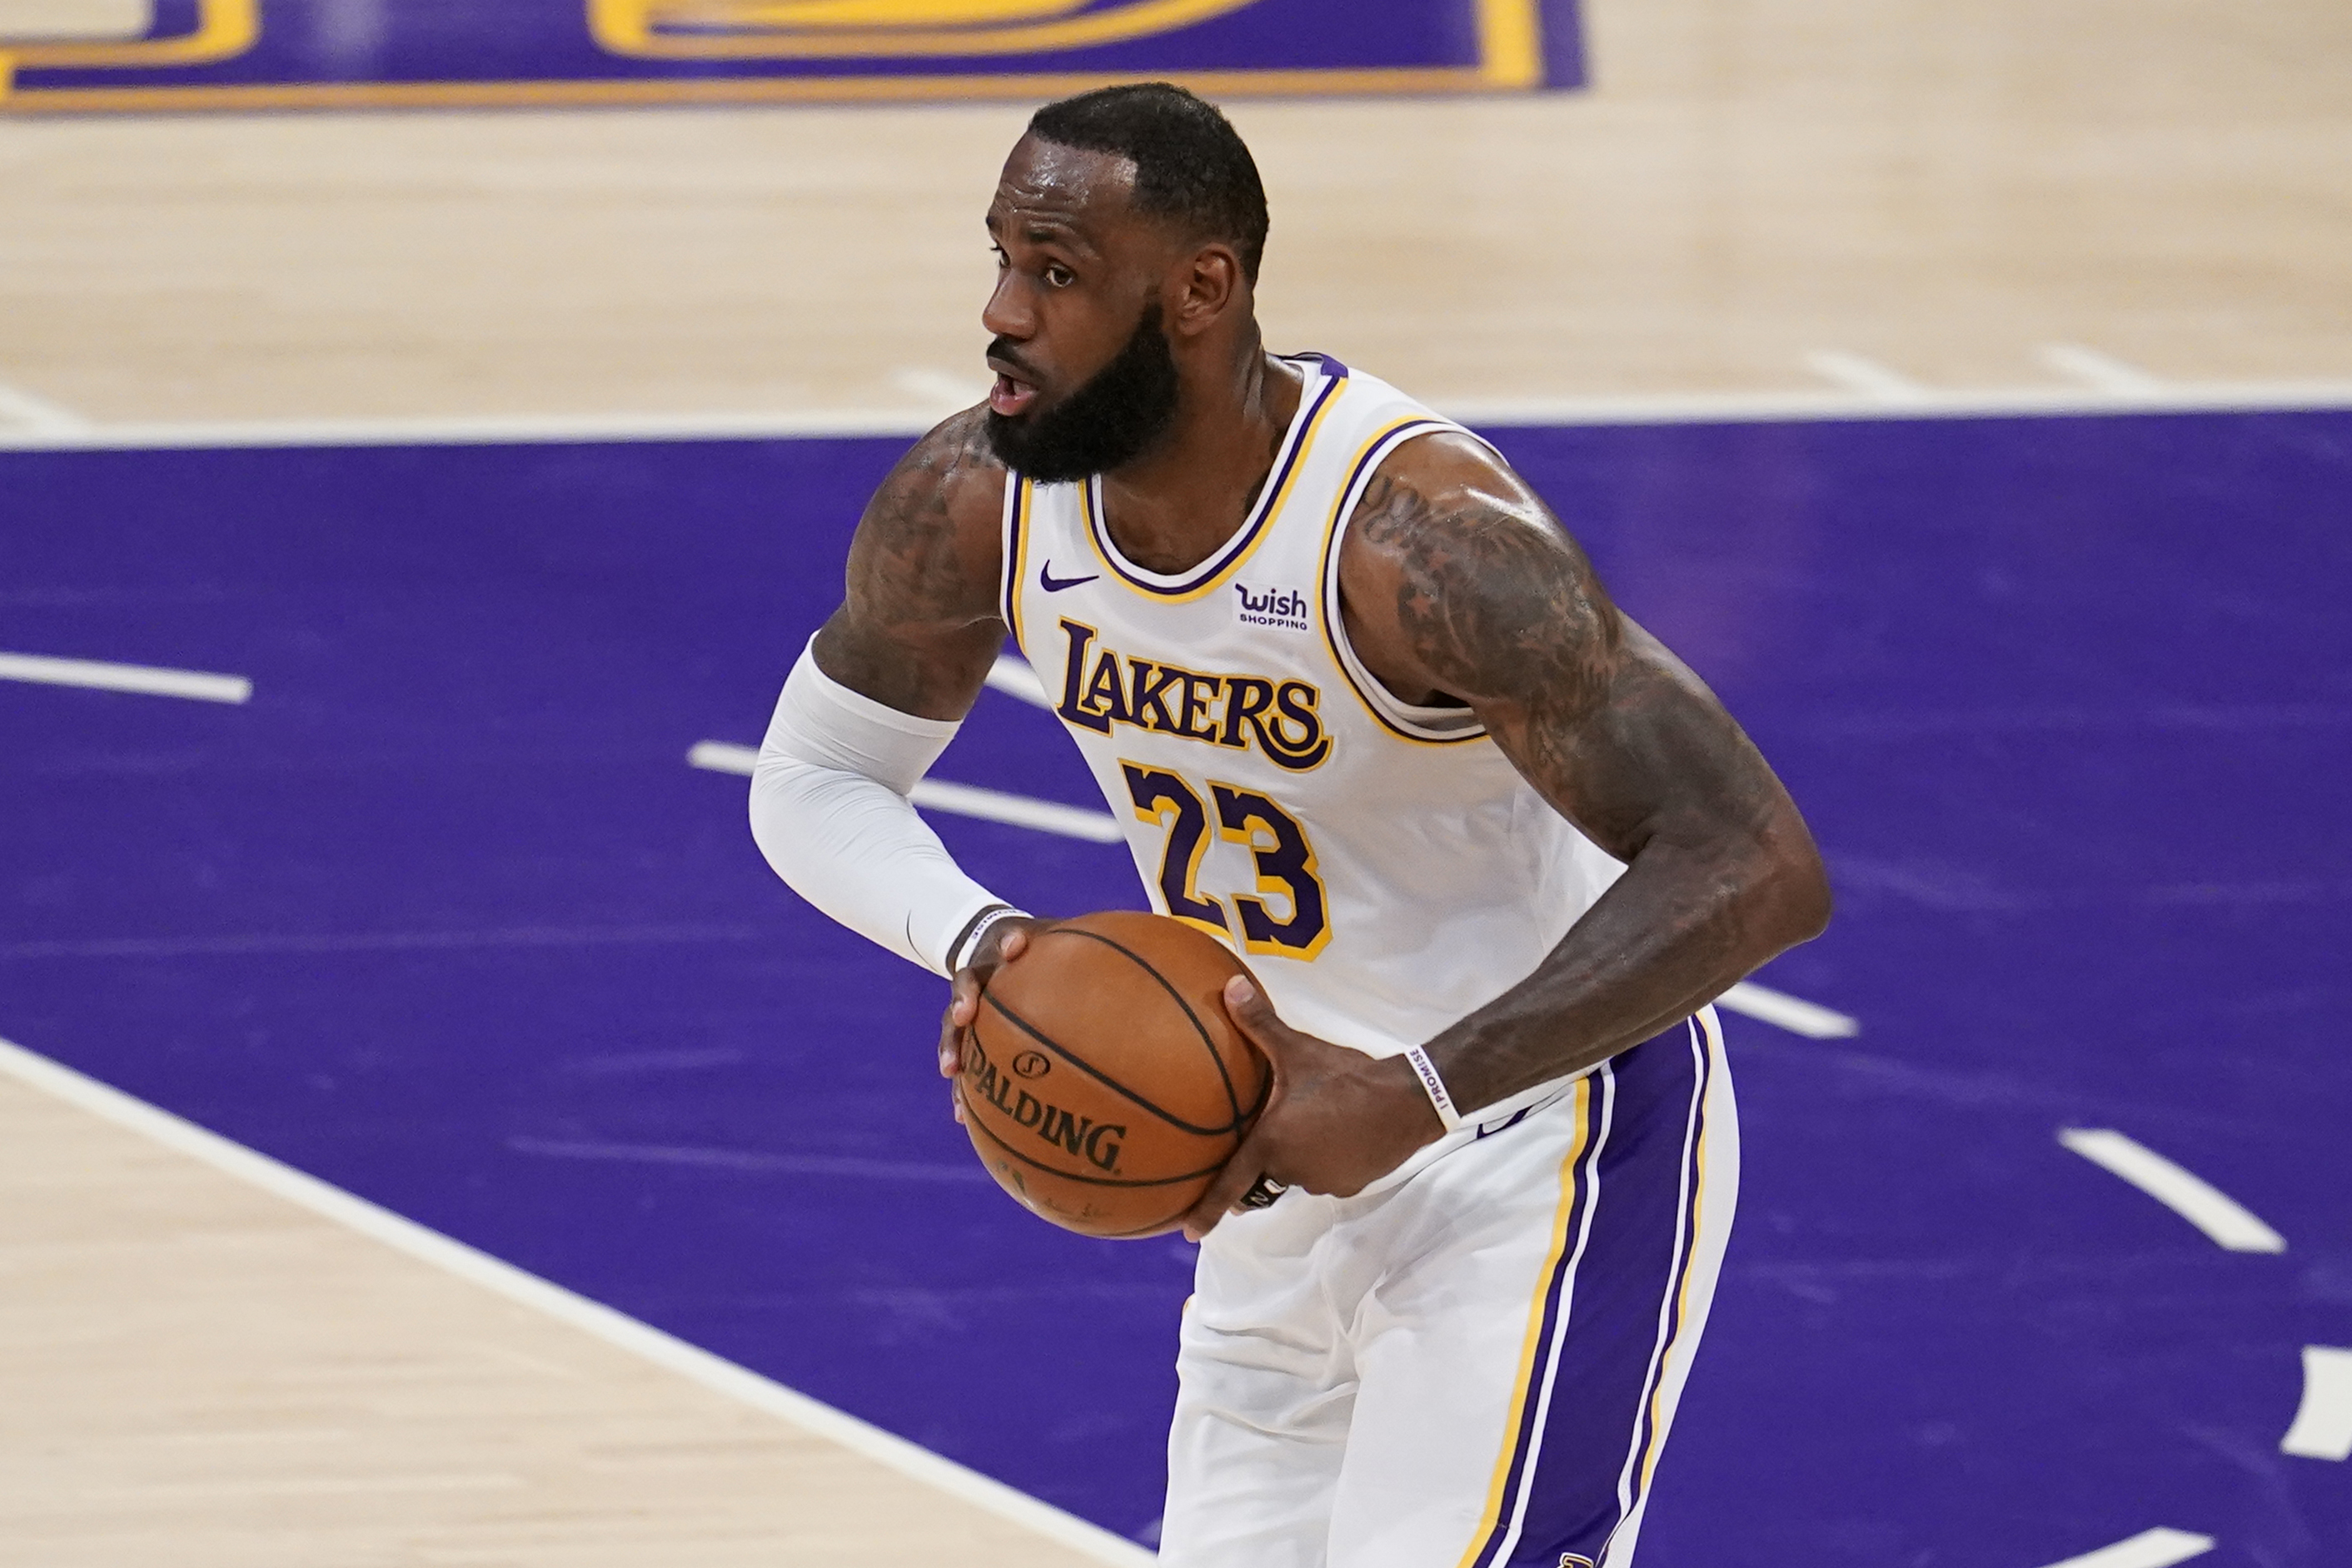 Lakers star LeBron James could return from ankle injury Friday vs. Kings 